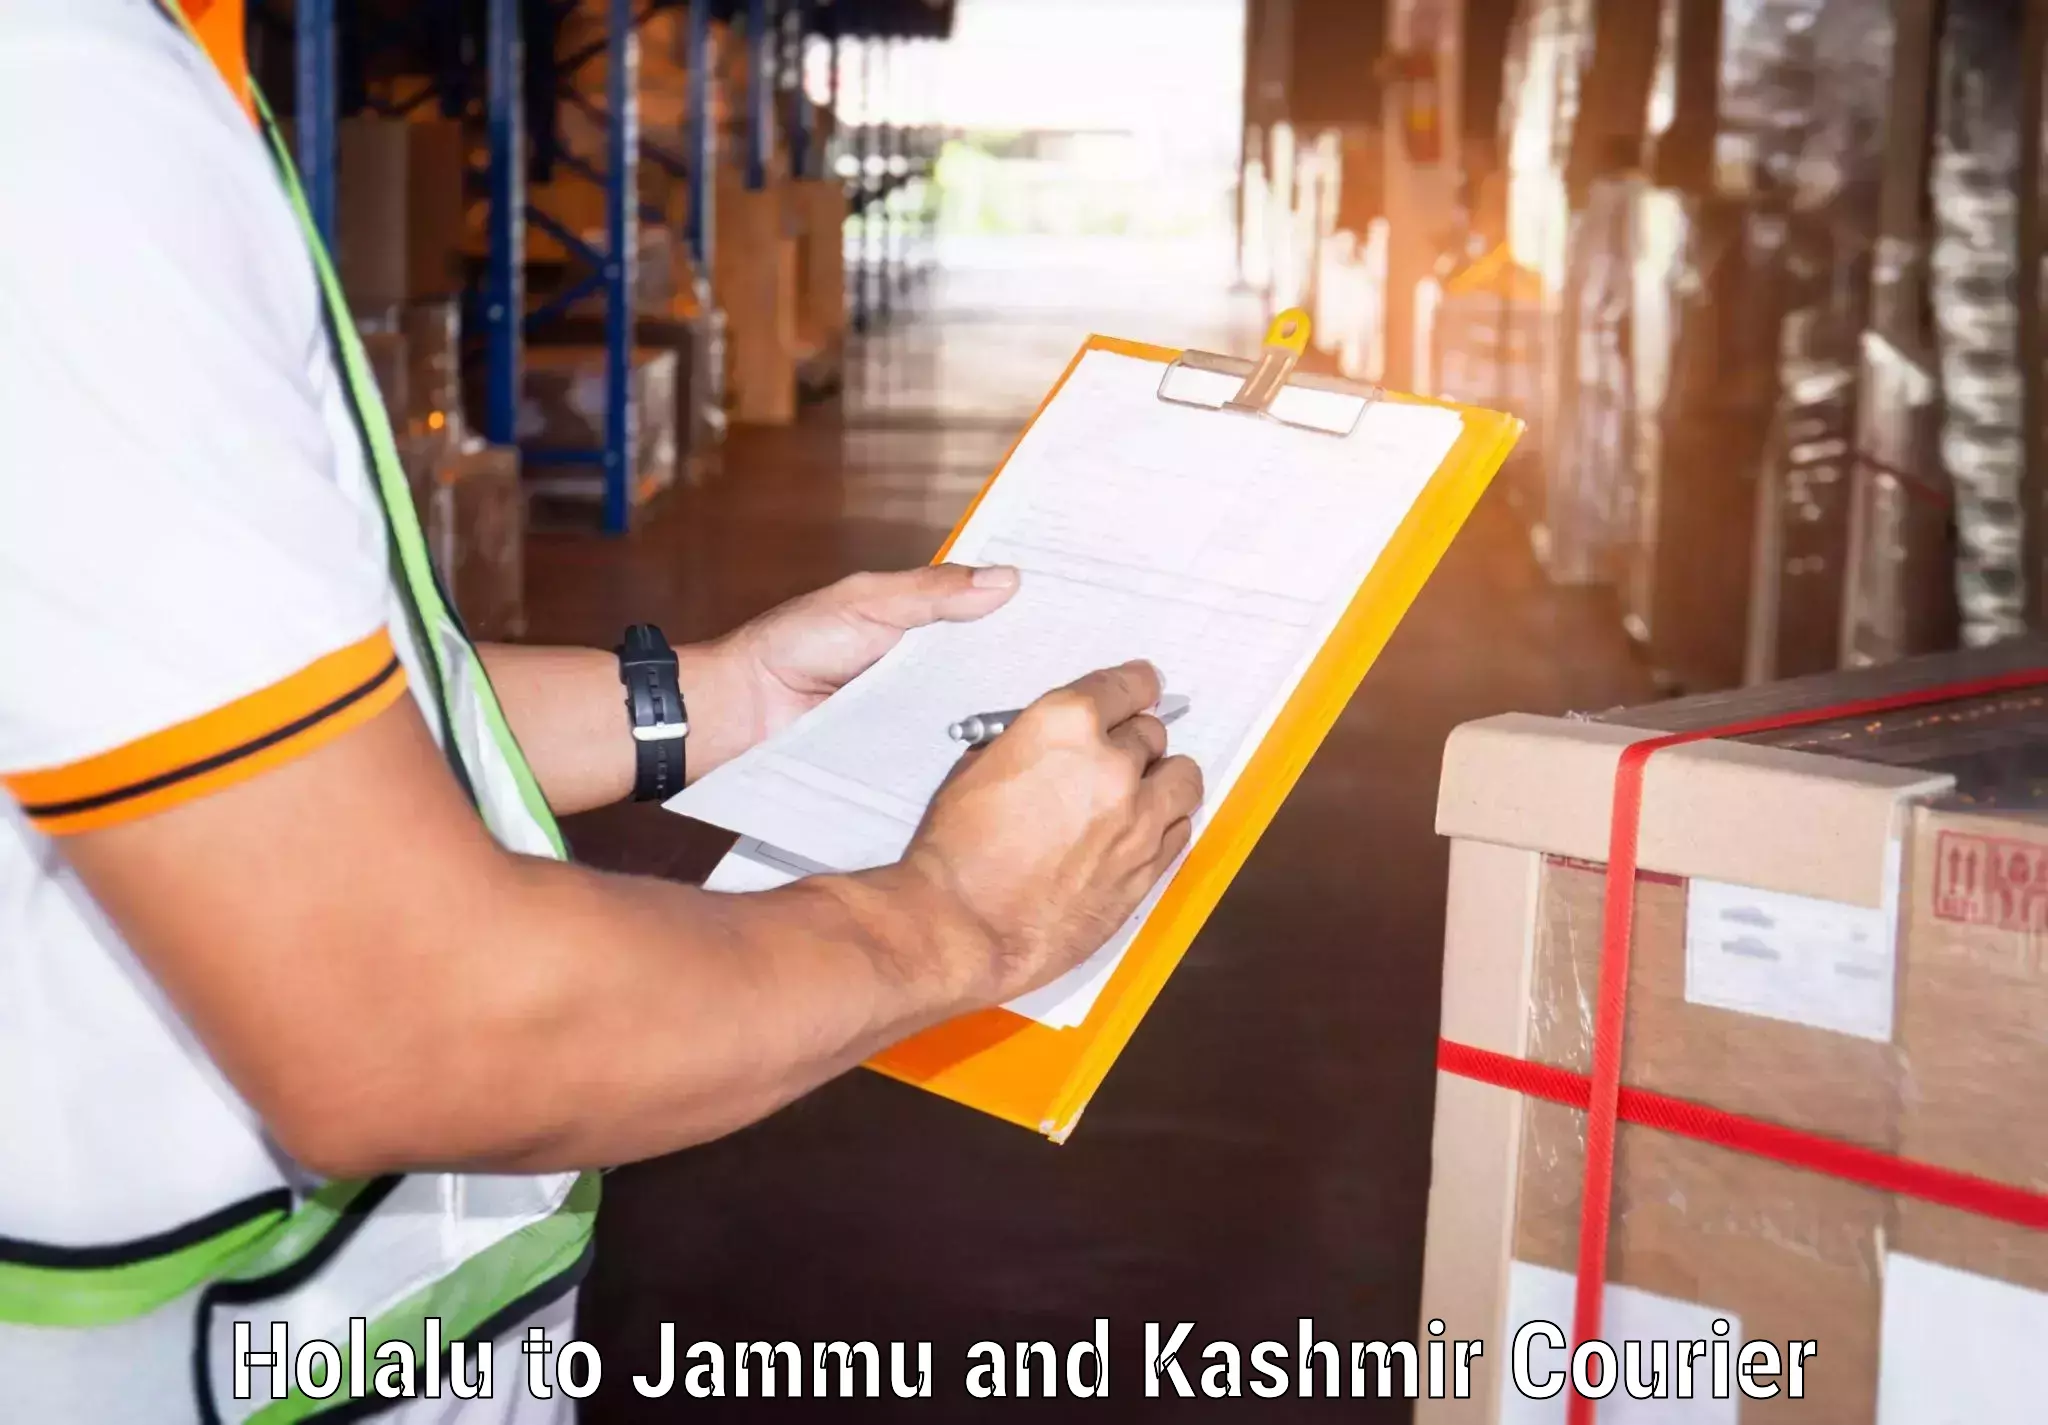 Ocean freight courier Holalu to University of Jammu